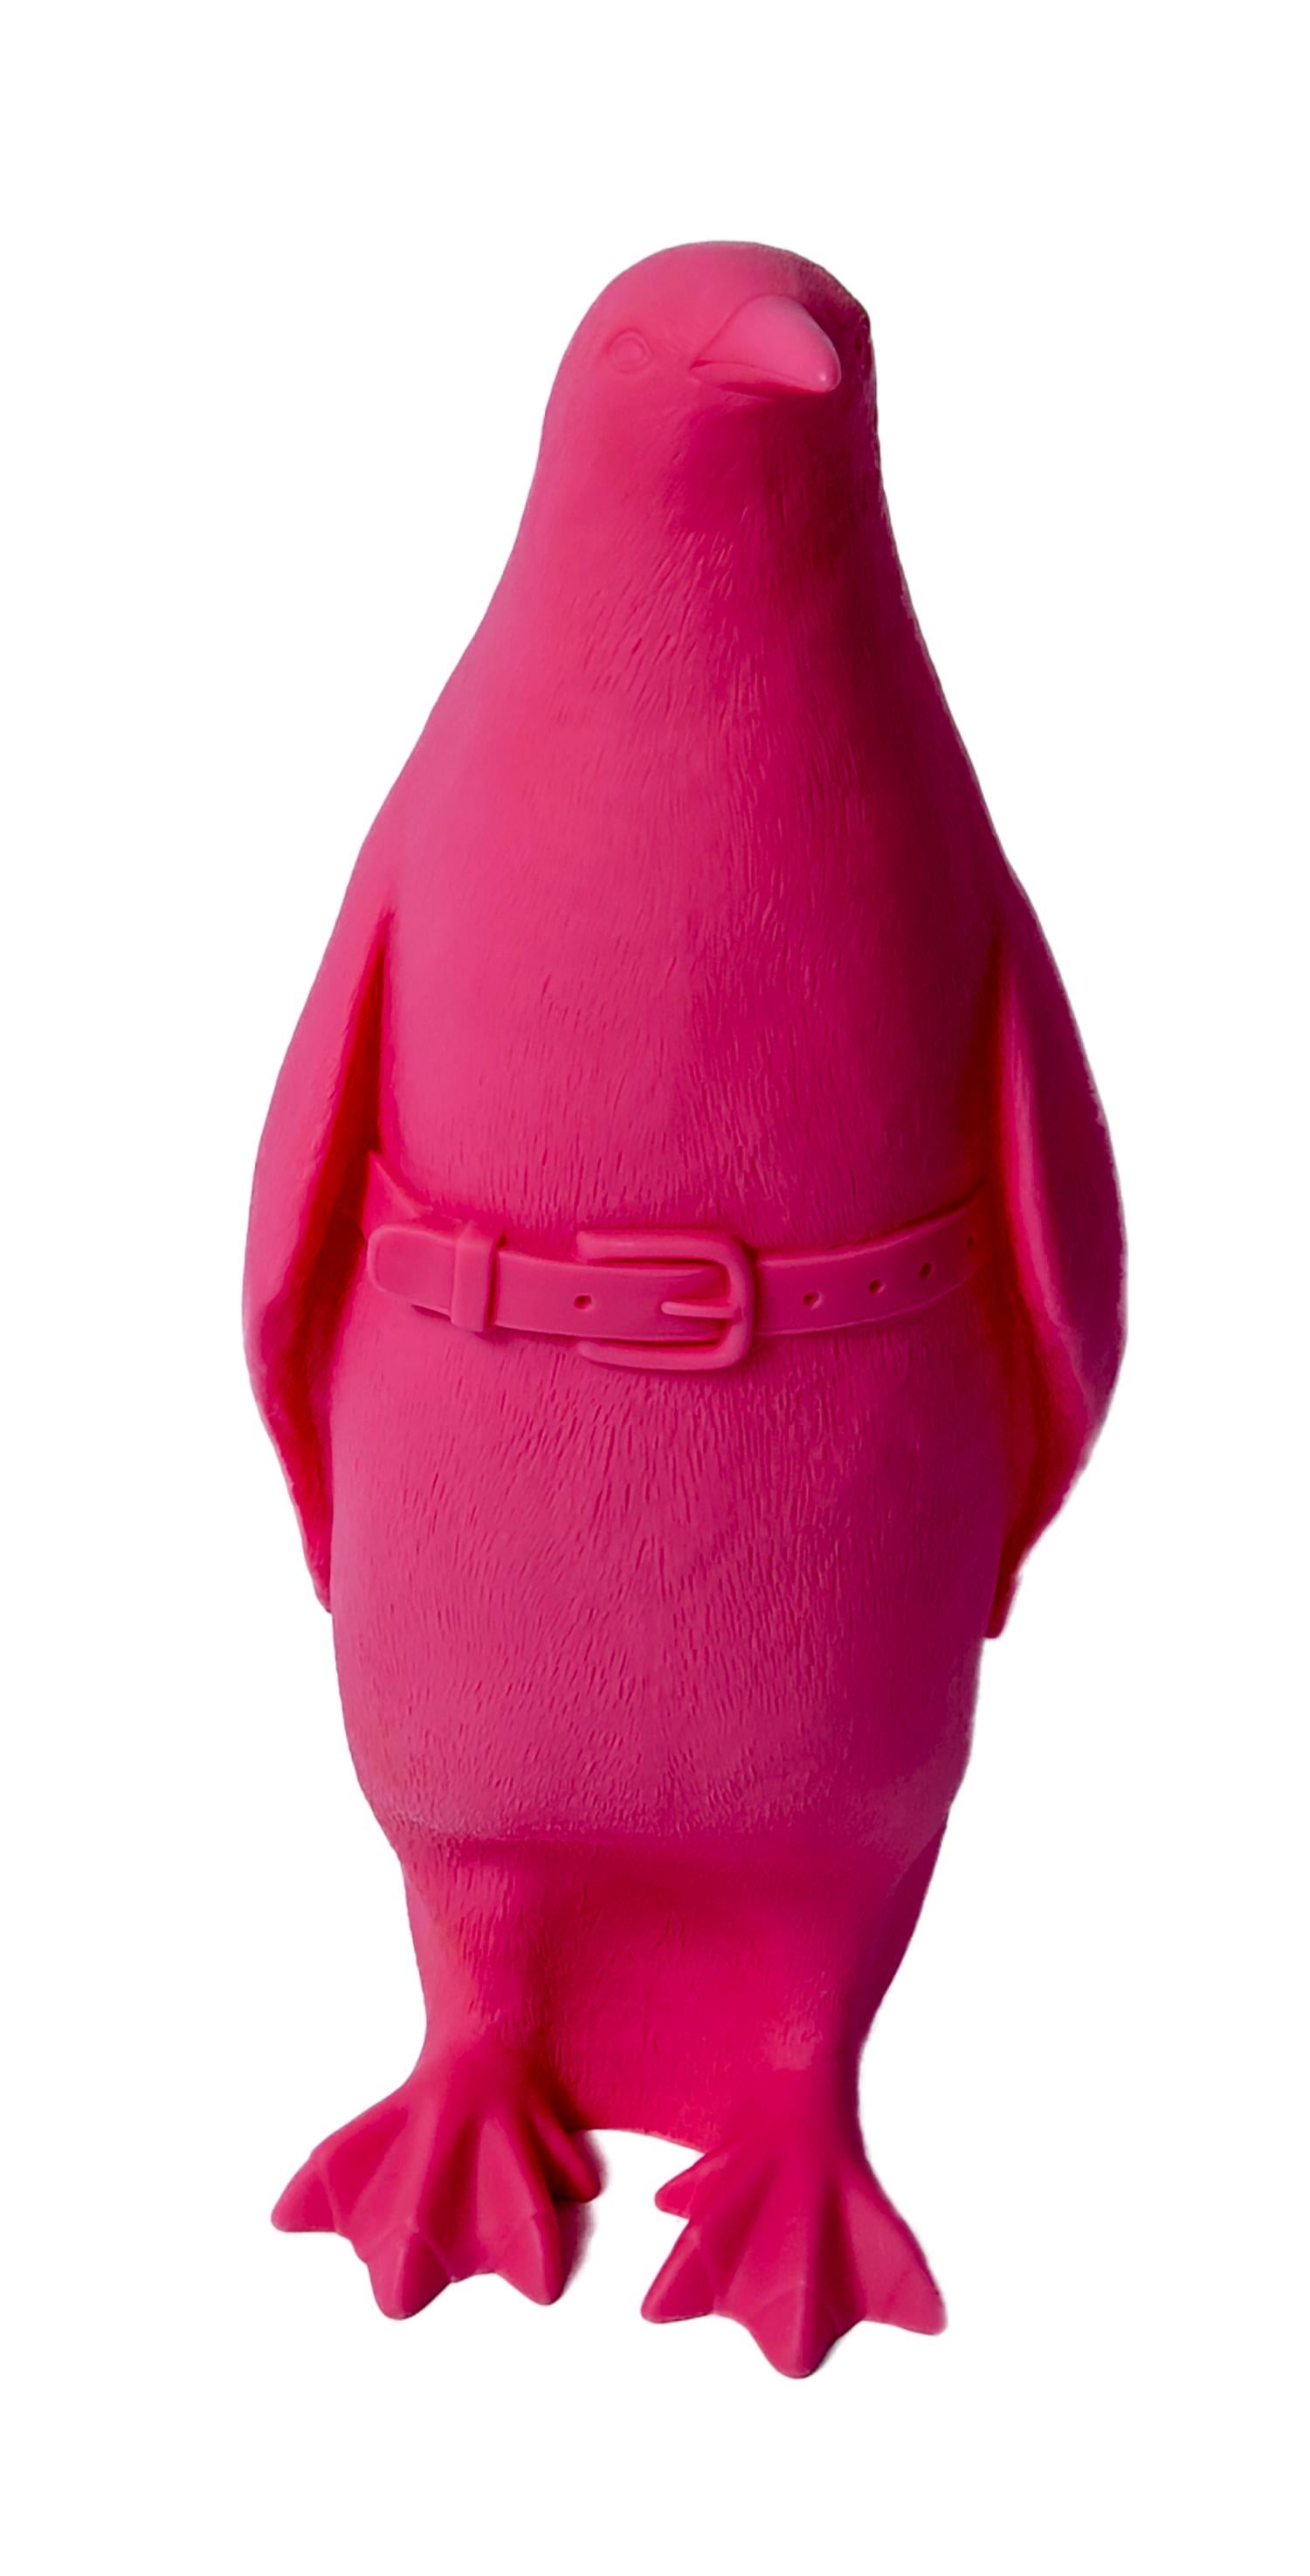 Small Cloned Penguin with Water Bottle, in Pink - Pop Art Sculpture by William Sweetlove